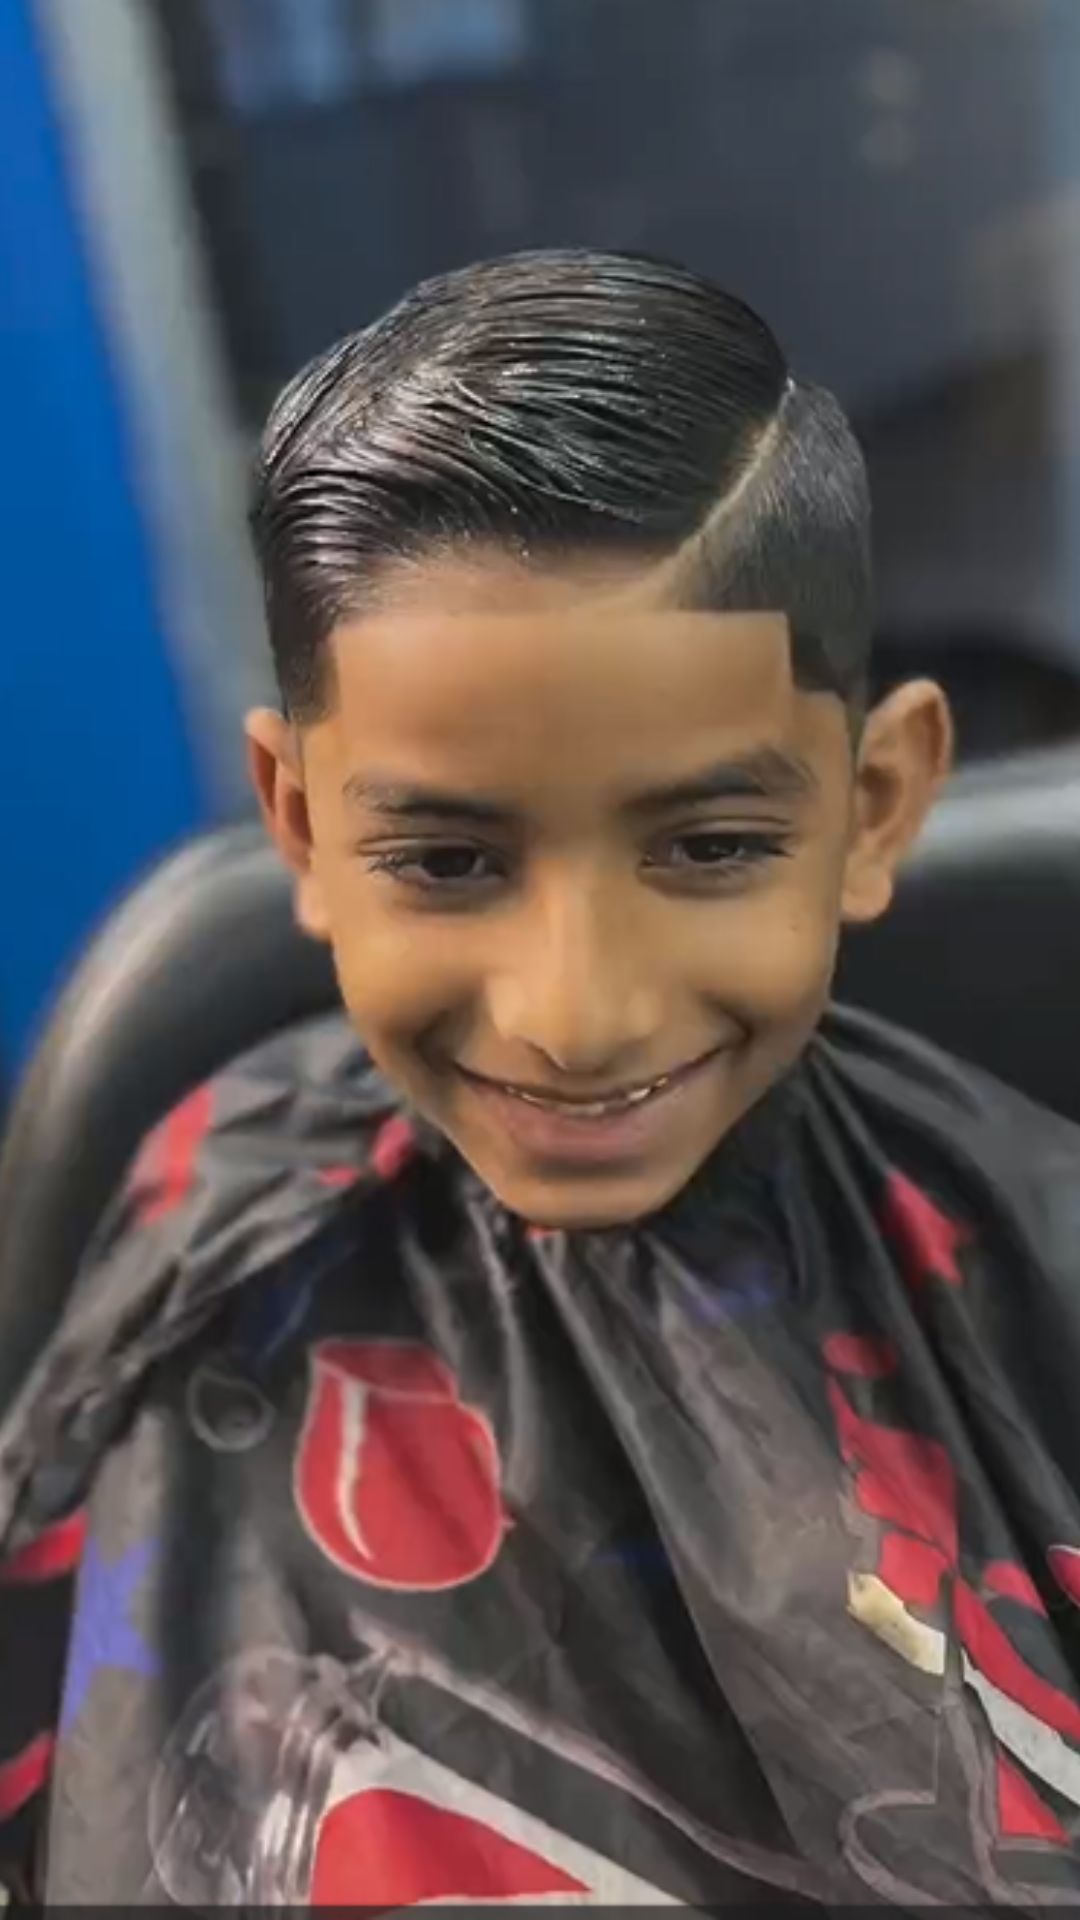 A boy with a side part haircut.